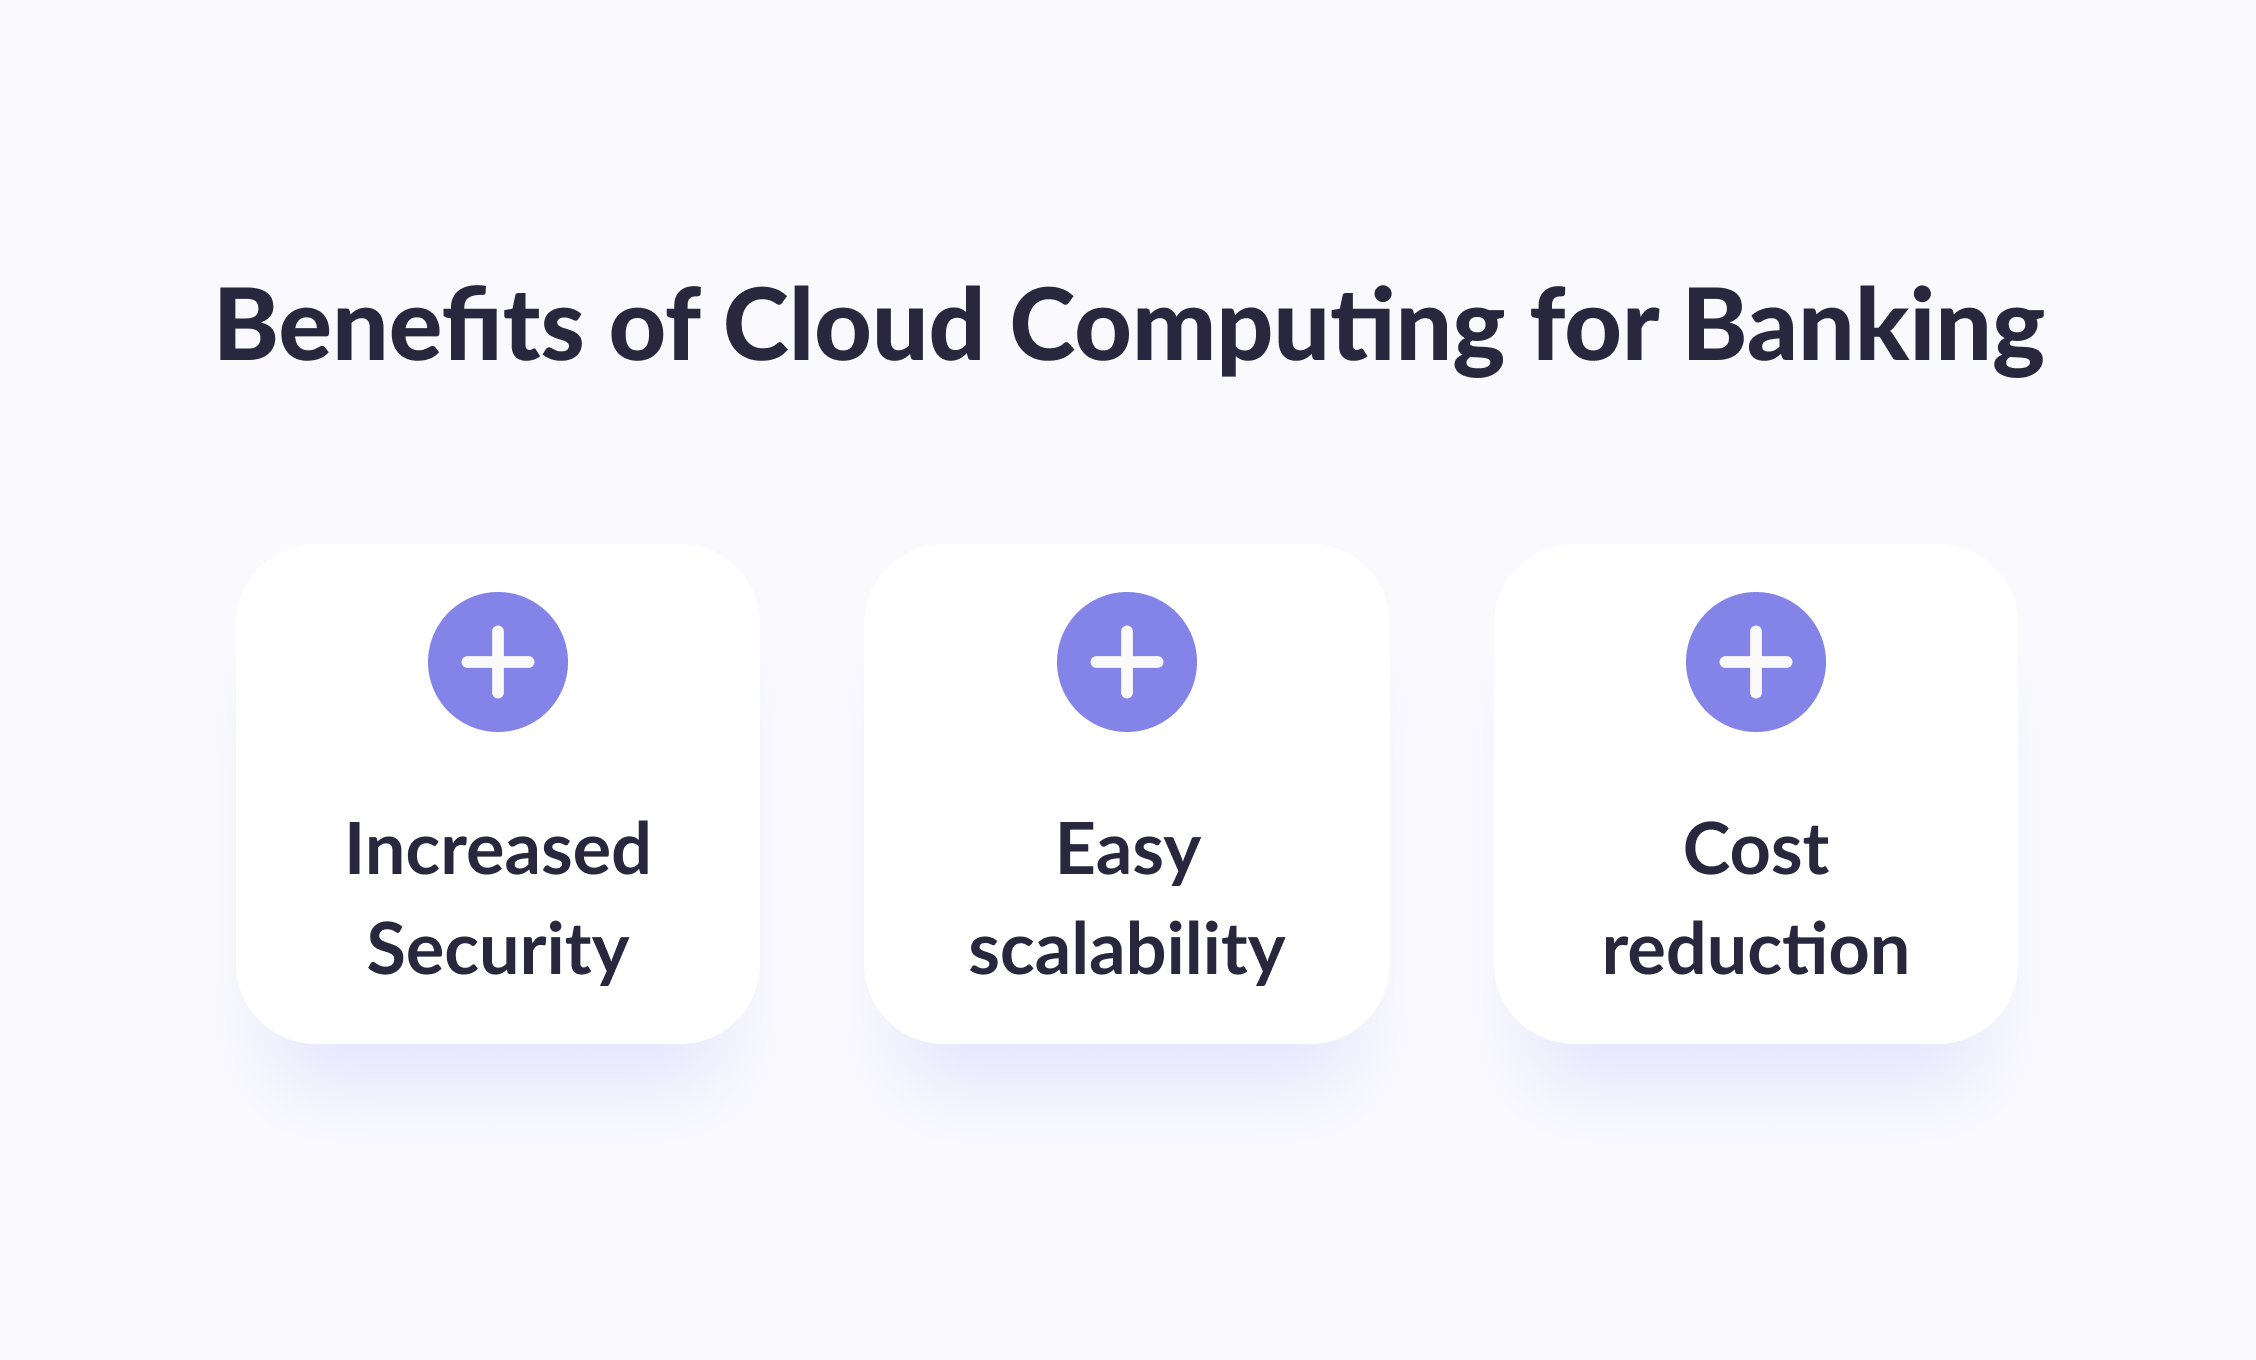 Benefits of cloud computing for banking